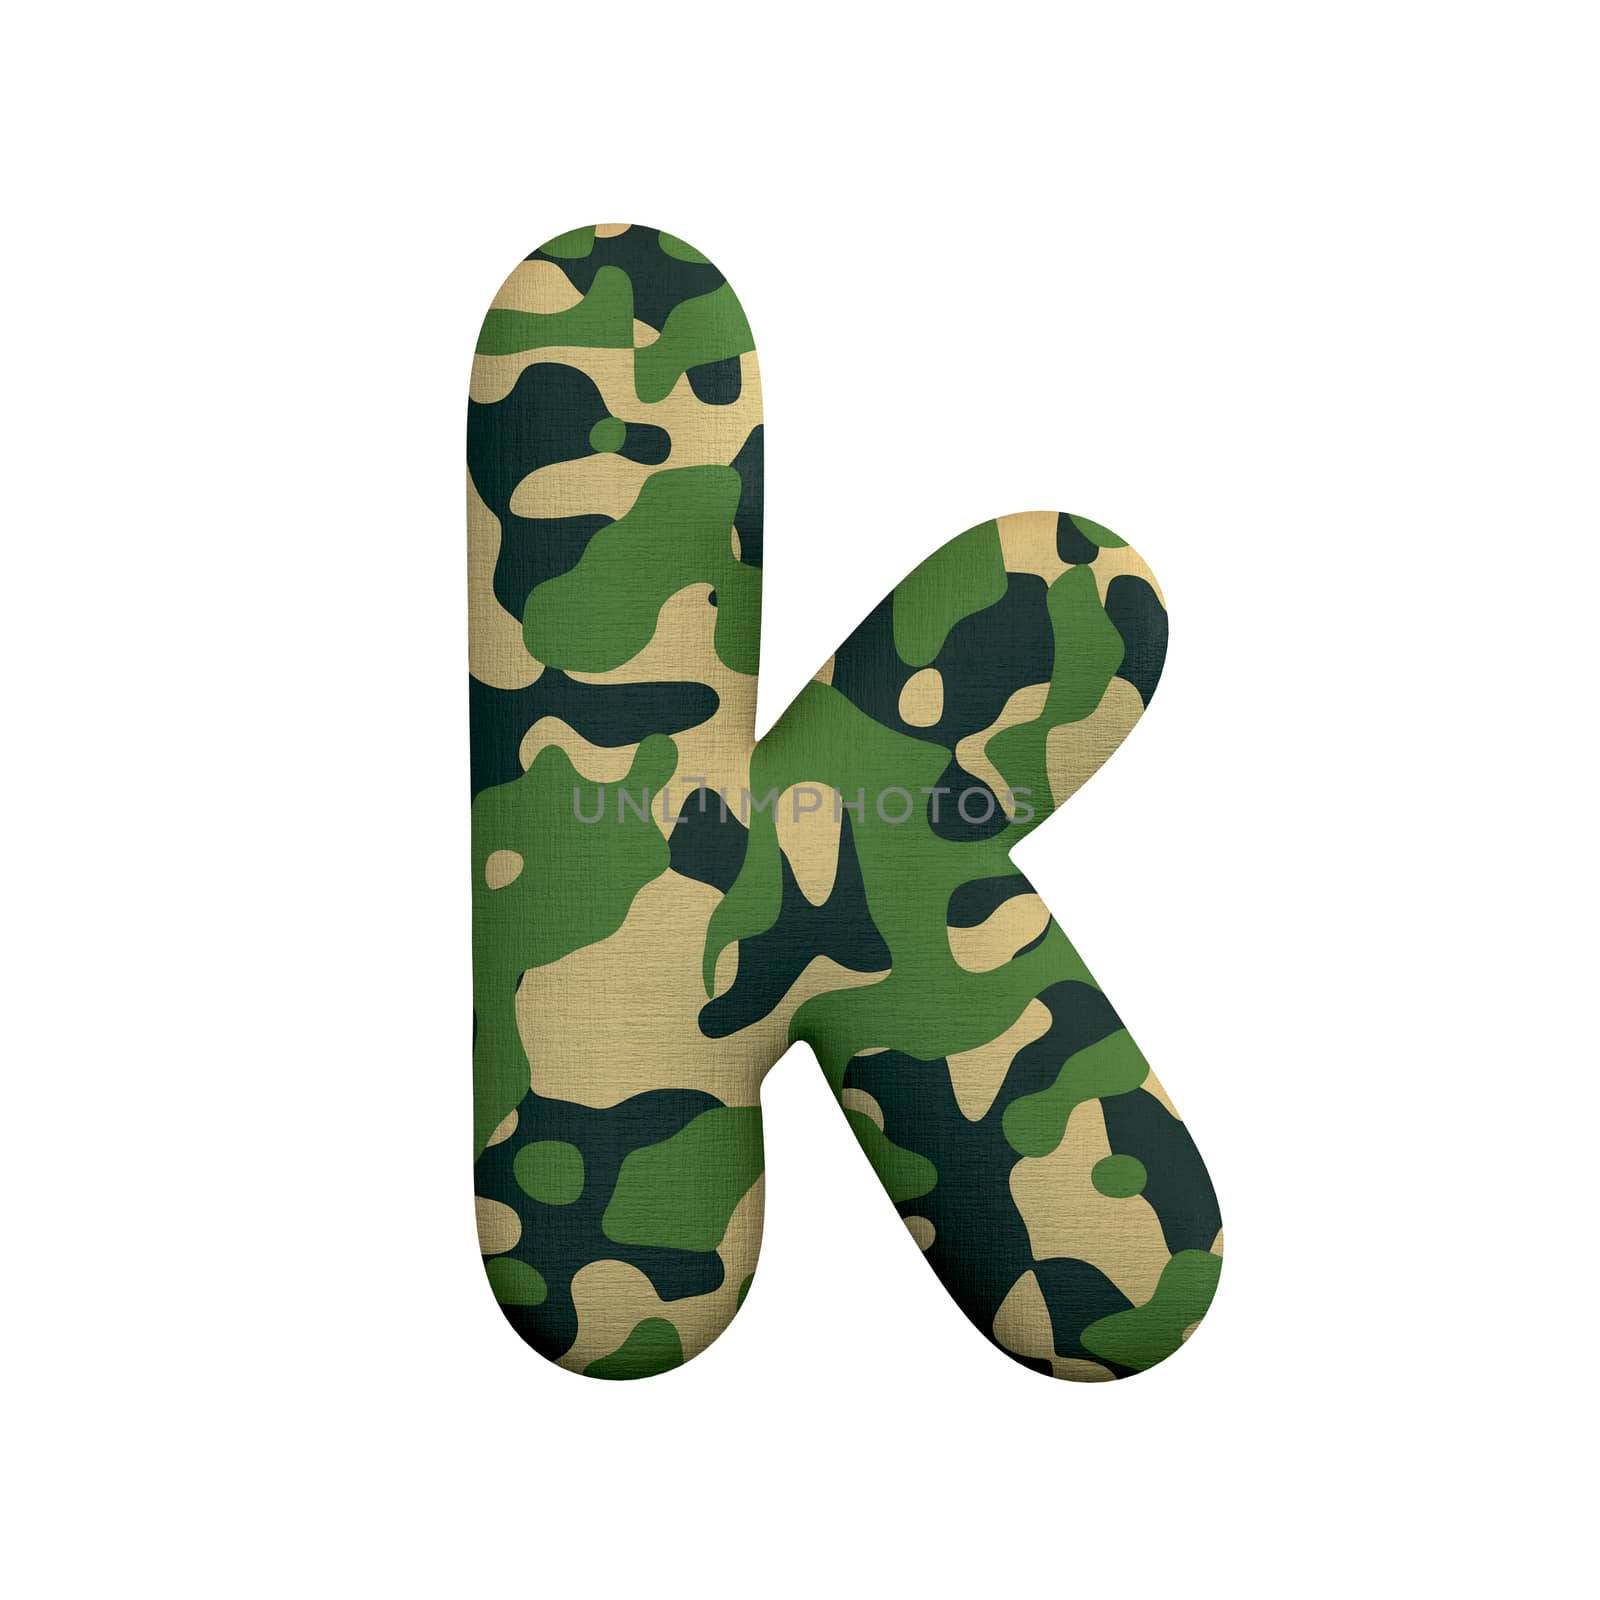 Army letter K - Lower-case 3d Camo font isolated on white background. This alphabet is perfect for creative illustrations related but not limited to Army, war, survivalism...